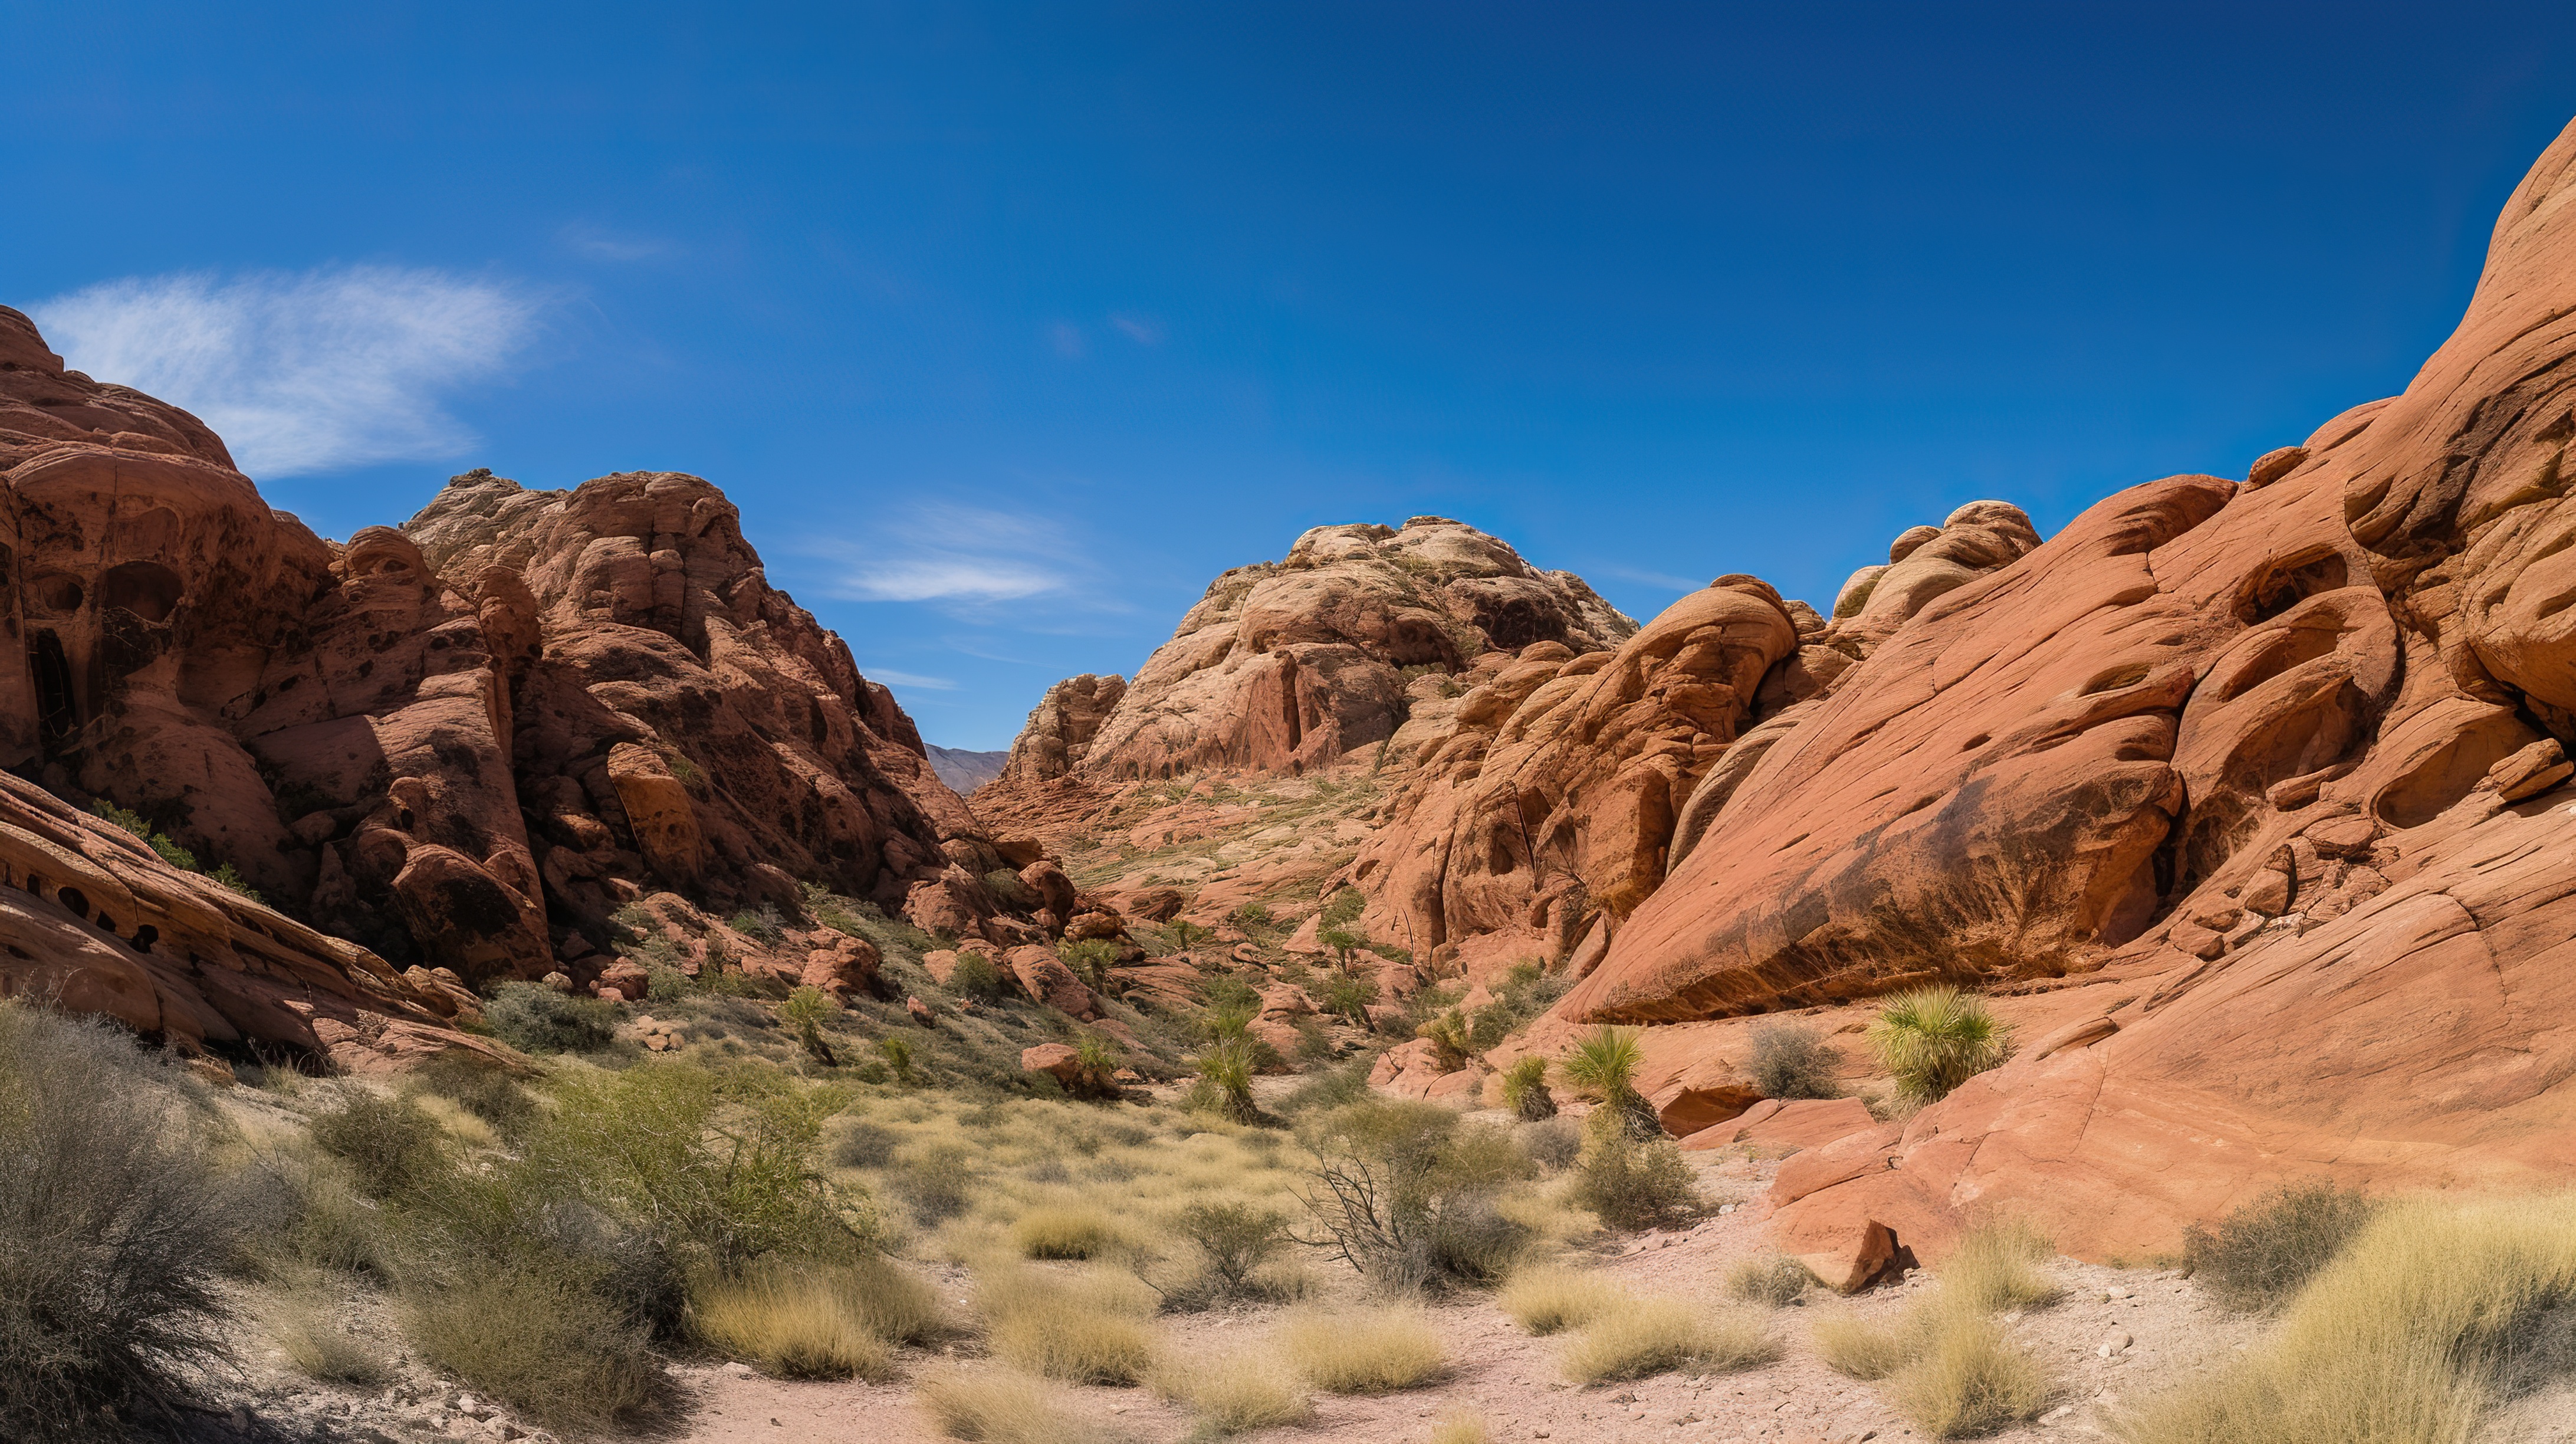 Beautiful red sandstones cliffs, desert view with the blue sky